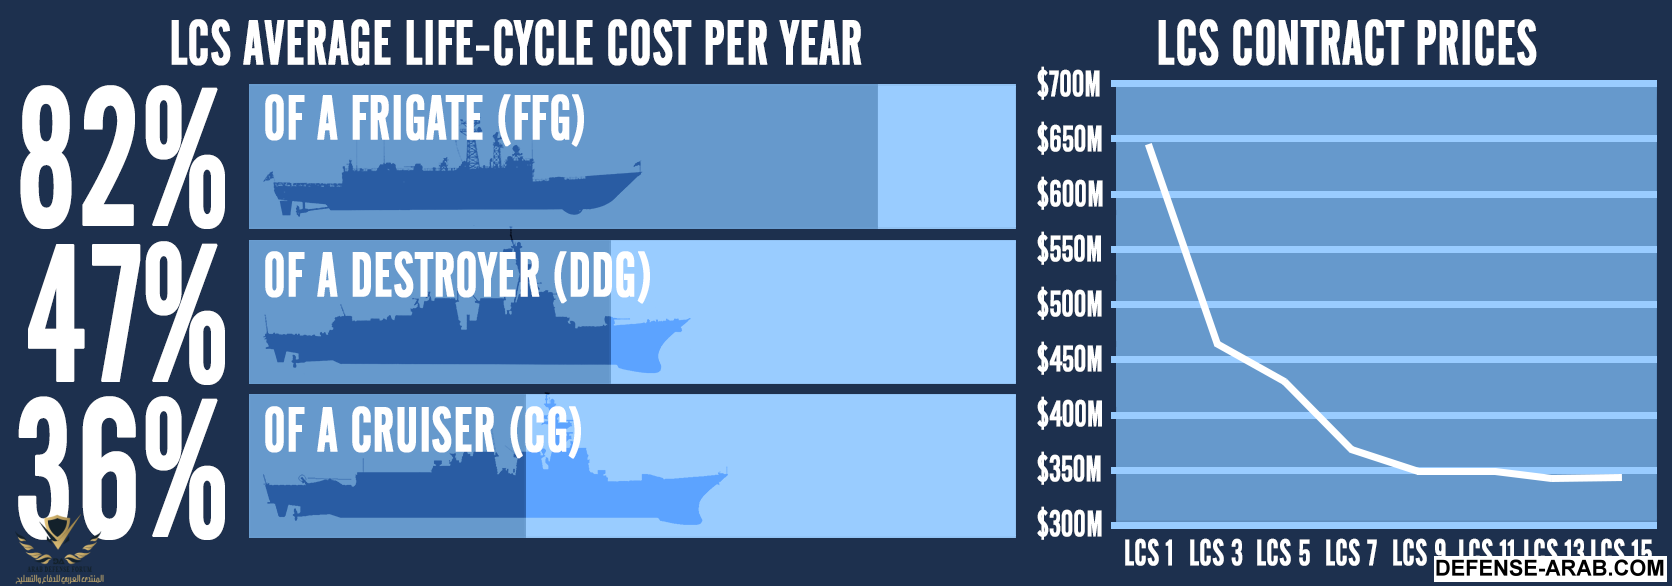 LCS-average-life-cycle-cost-per-year.png